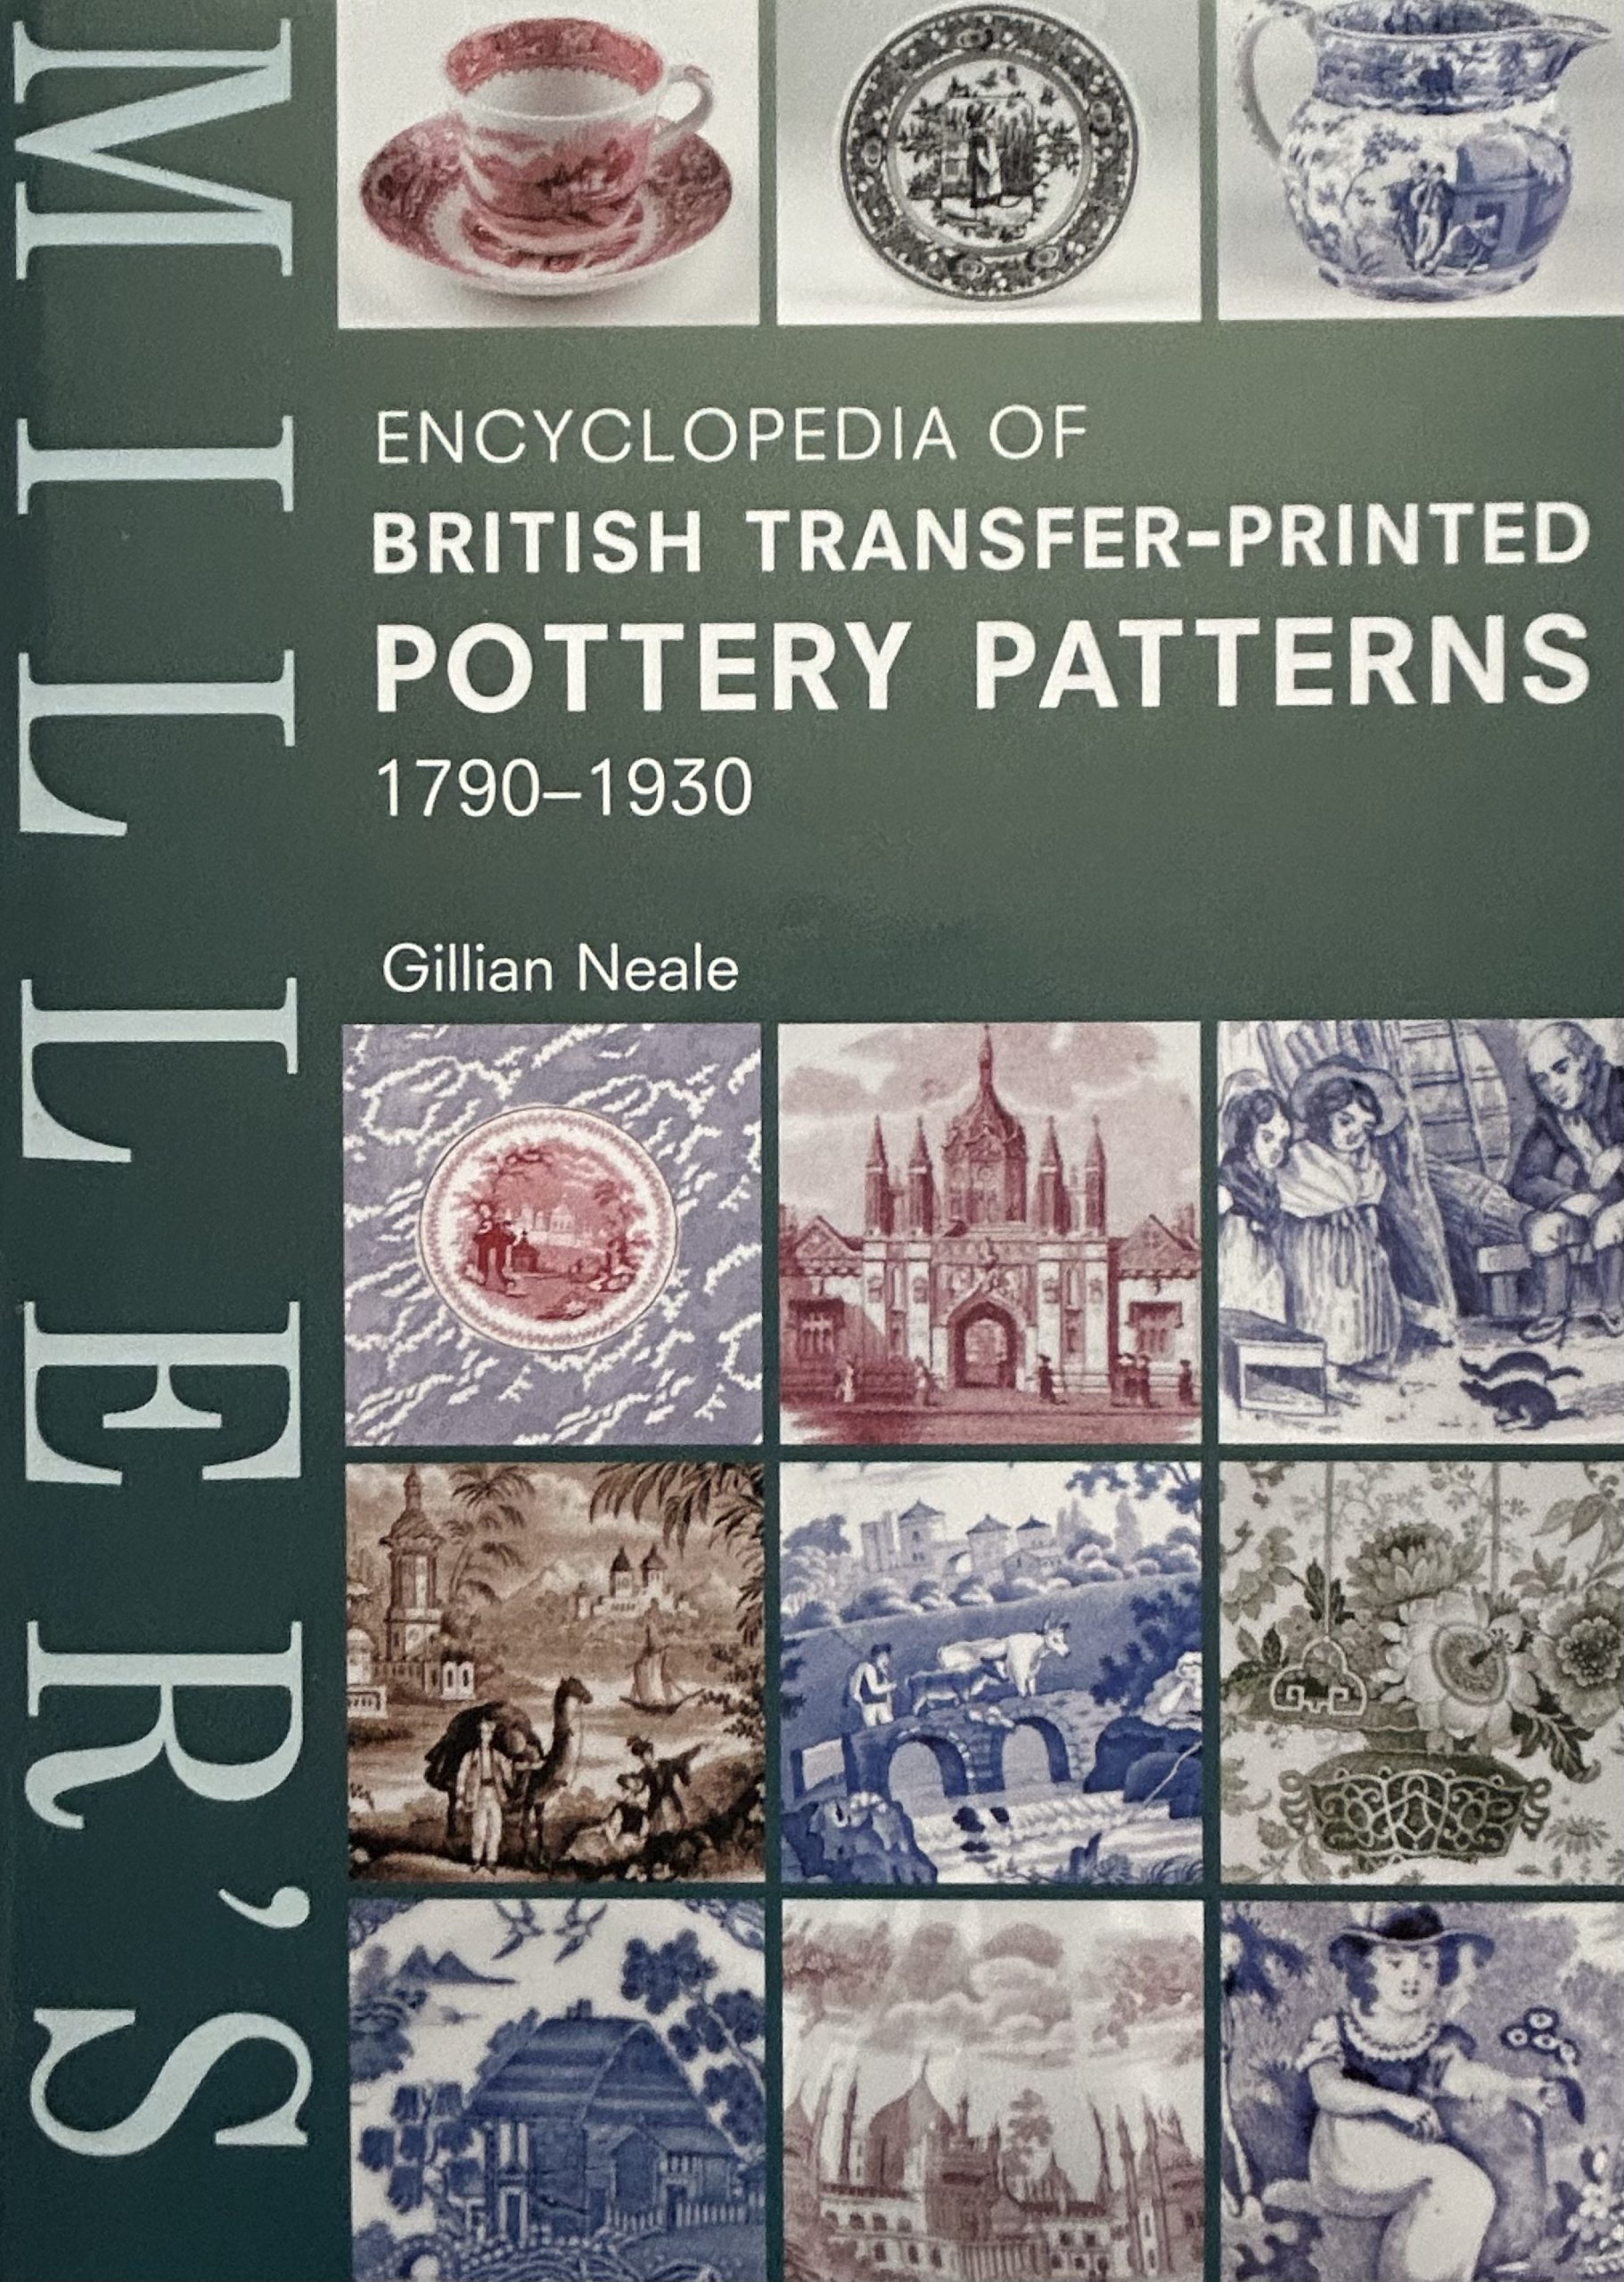 Millers Encyclopedia Of British Transfer-Printed Pottery Patterns 1790-1930